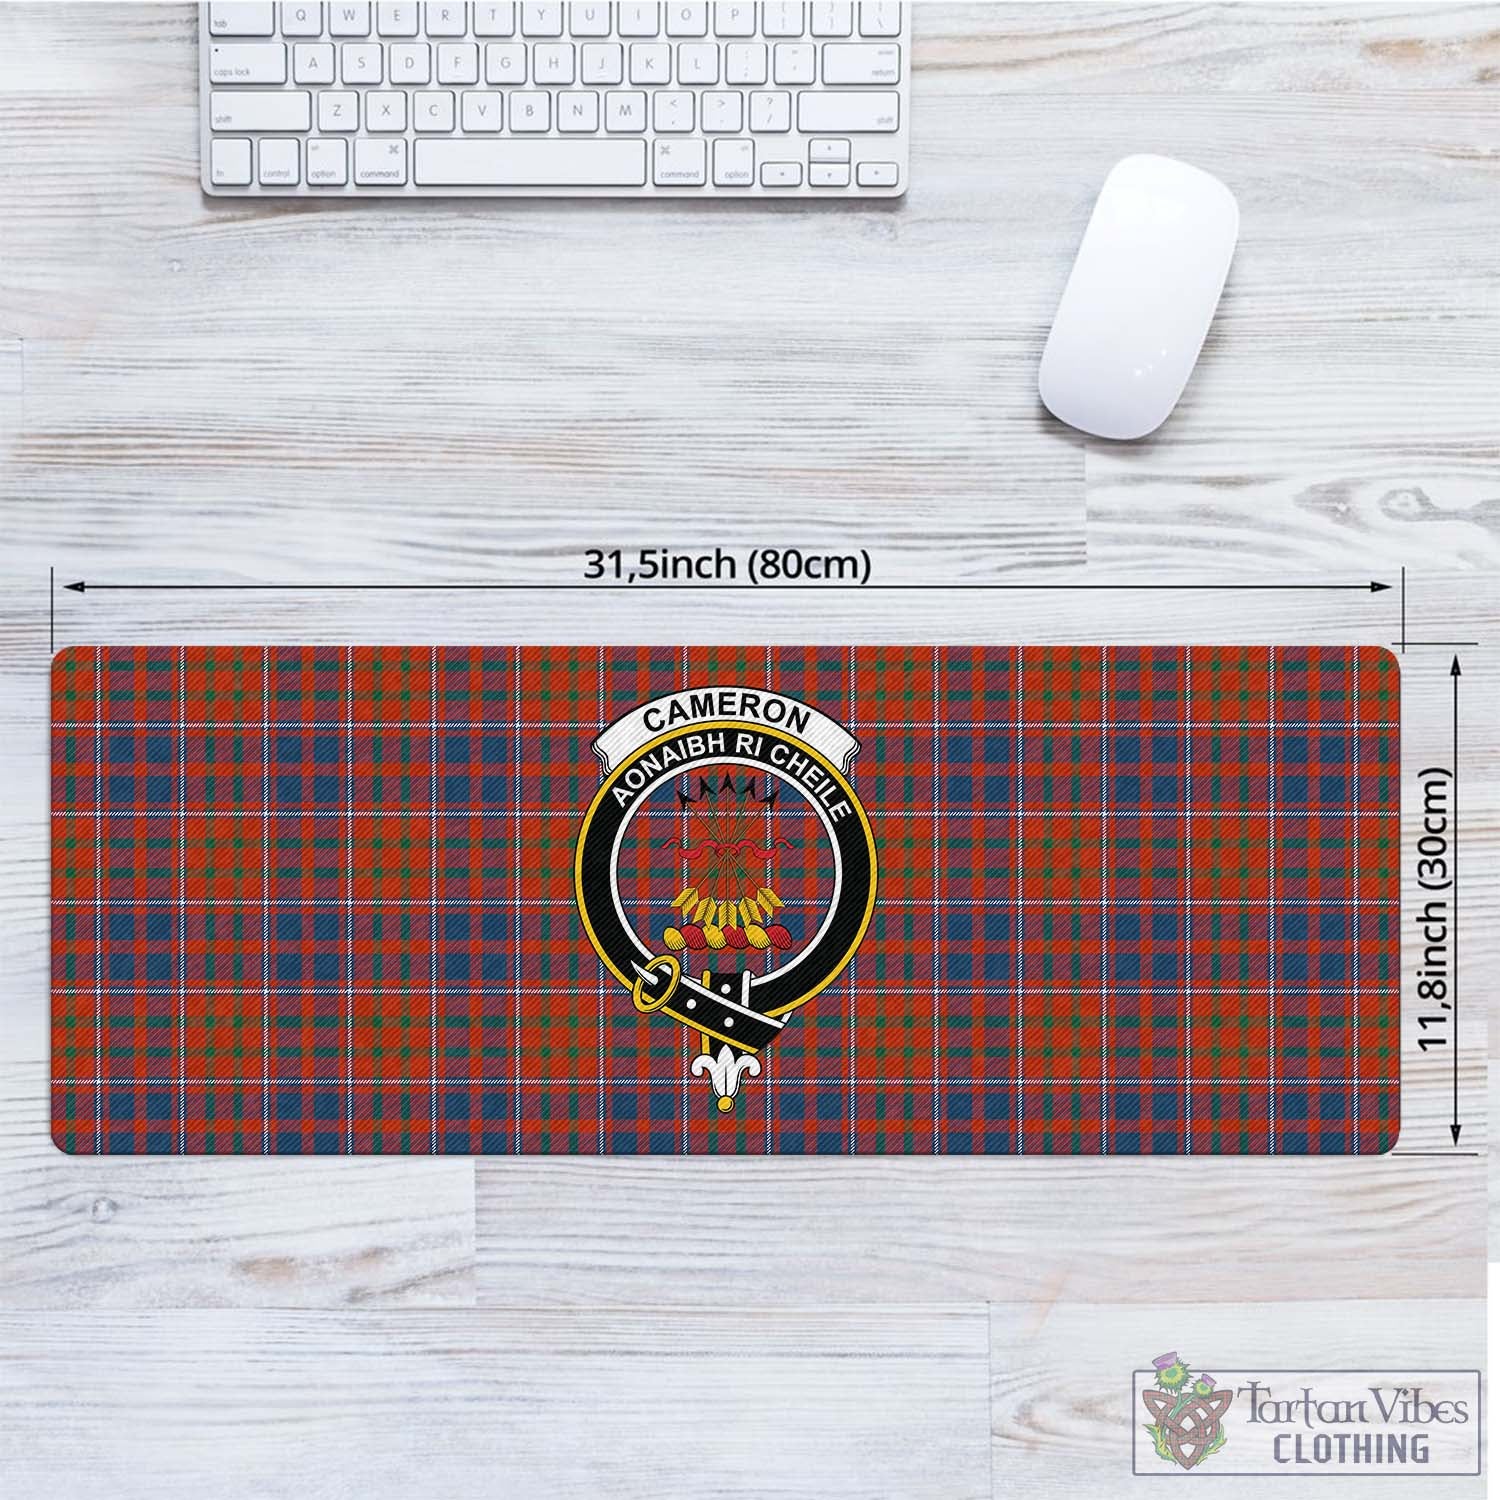 Tartan Vibes Clothing Cameron of Lochiel Ancient Tartan Mouse Pad with Family Crest